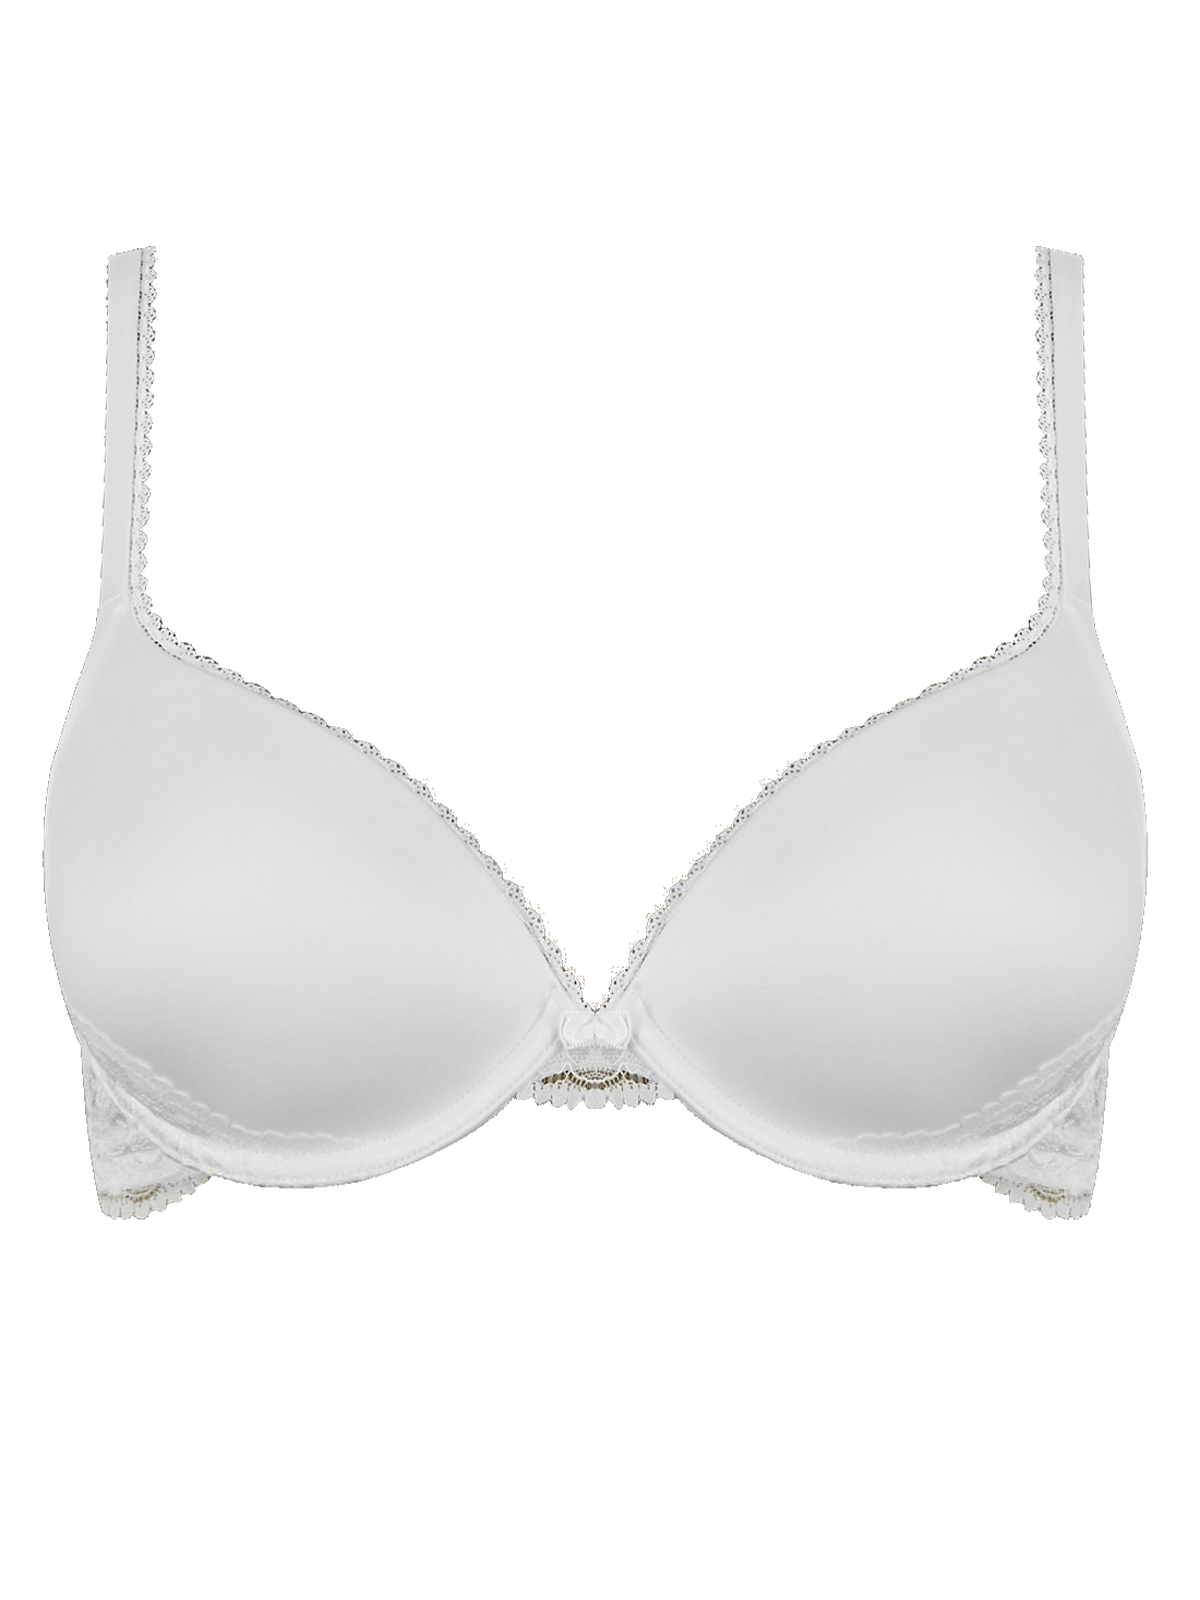 Marks and Spencer - - M&5 WHITE Lace Padded Push-up Bra - Size 32 to 38 ...